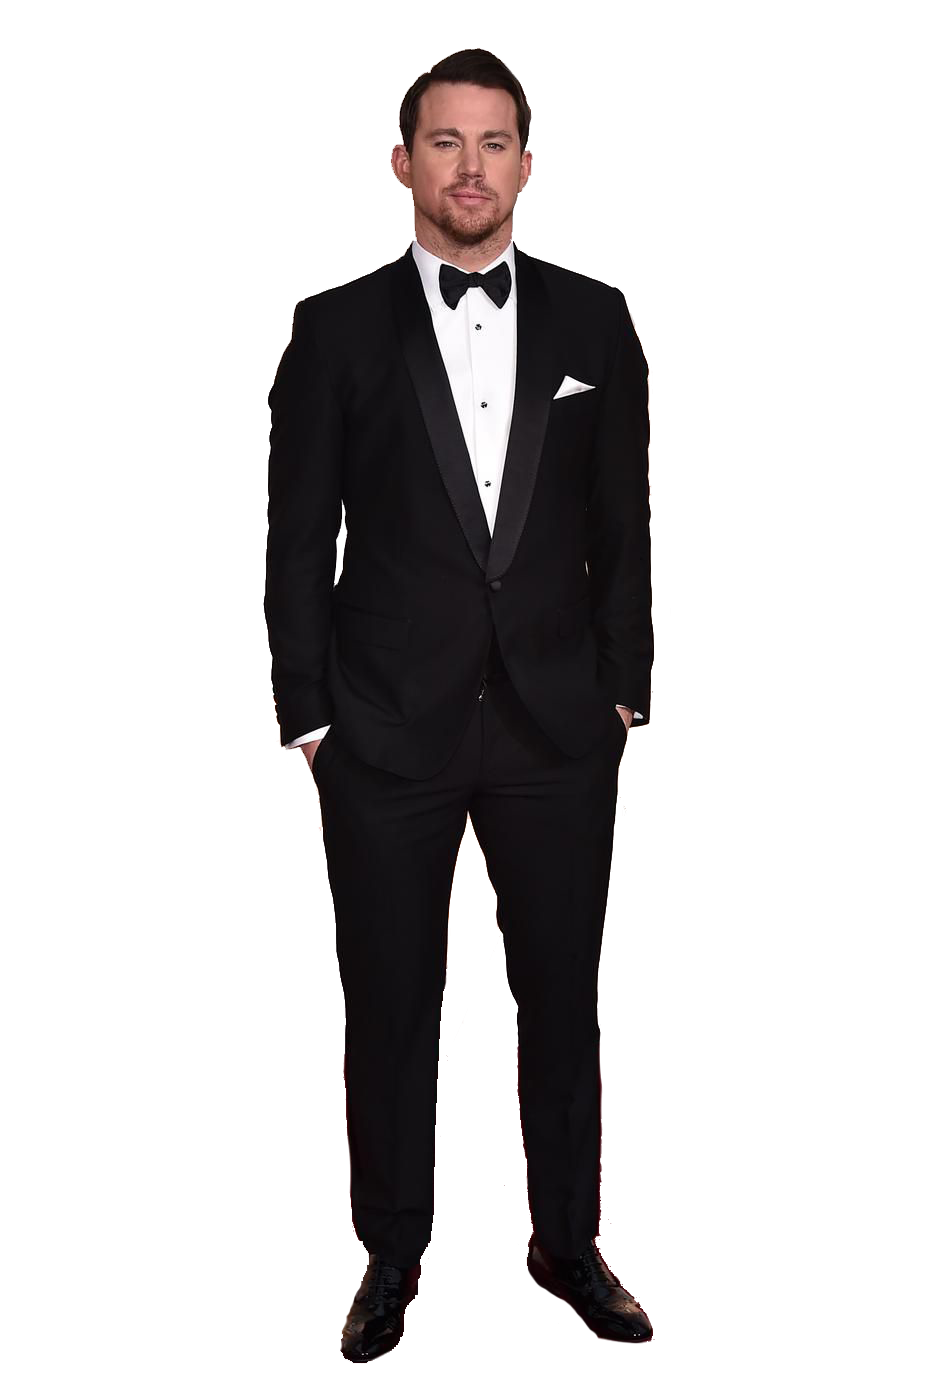 Channing Tatum PNG Picture